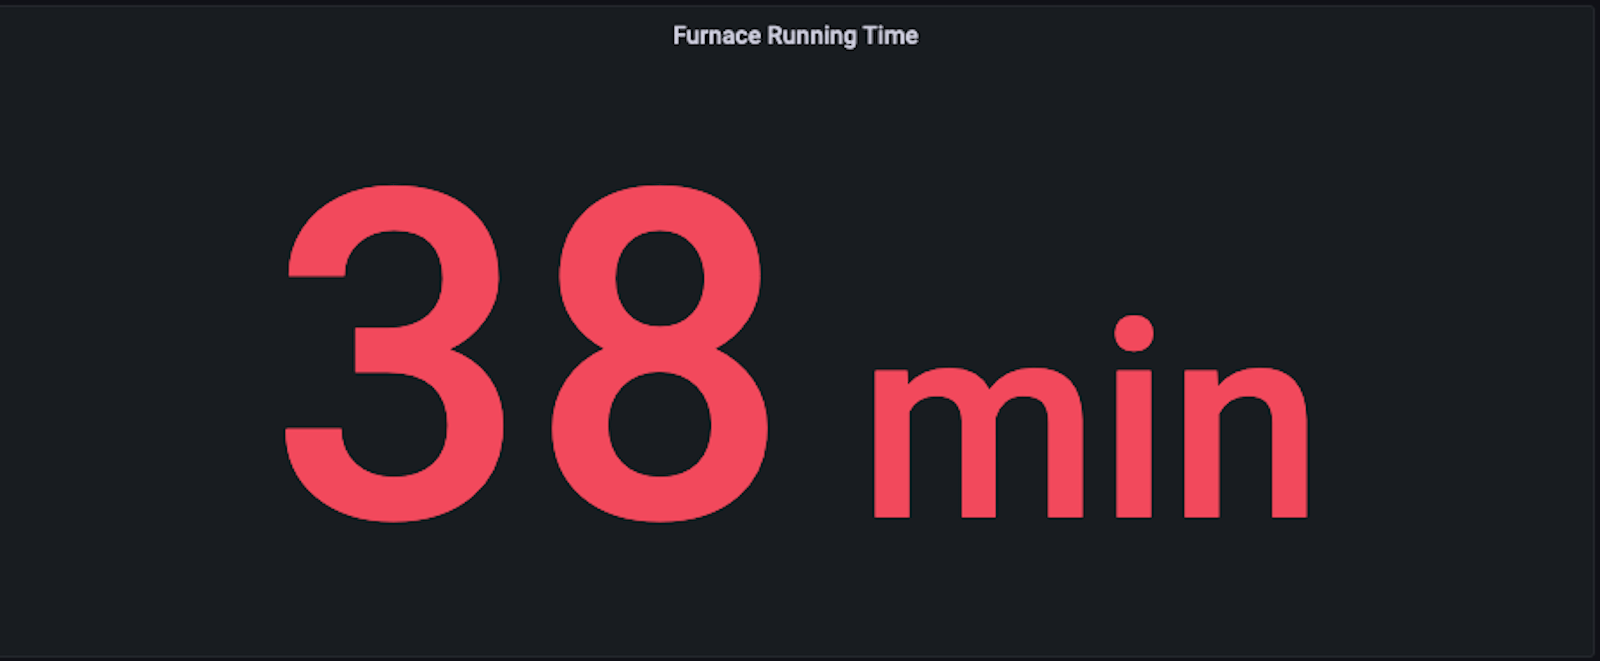 A Grafana stat panel showing 38 minutes of furnace running time.